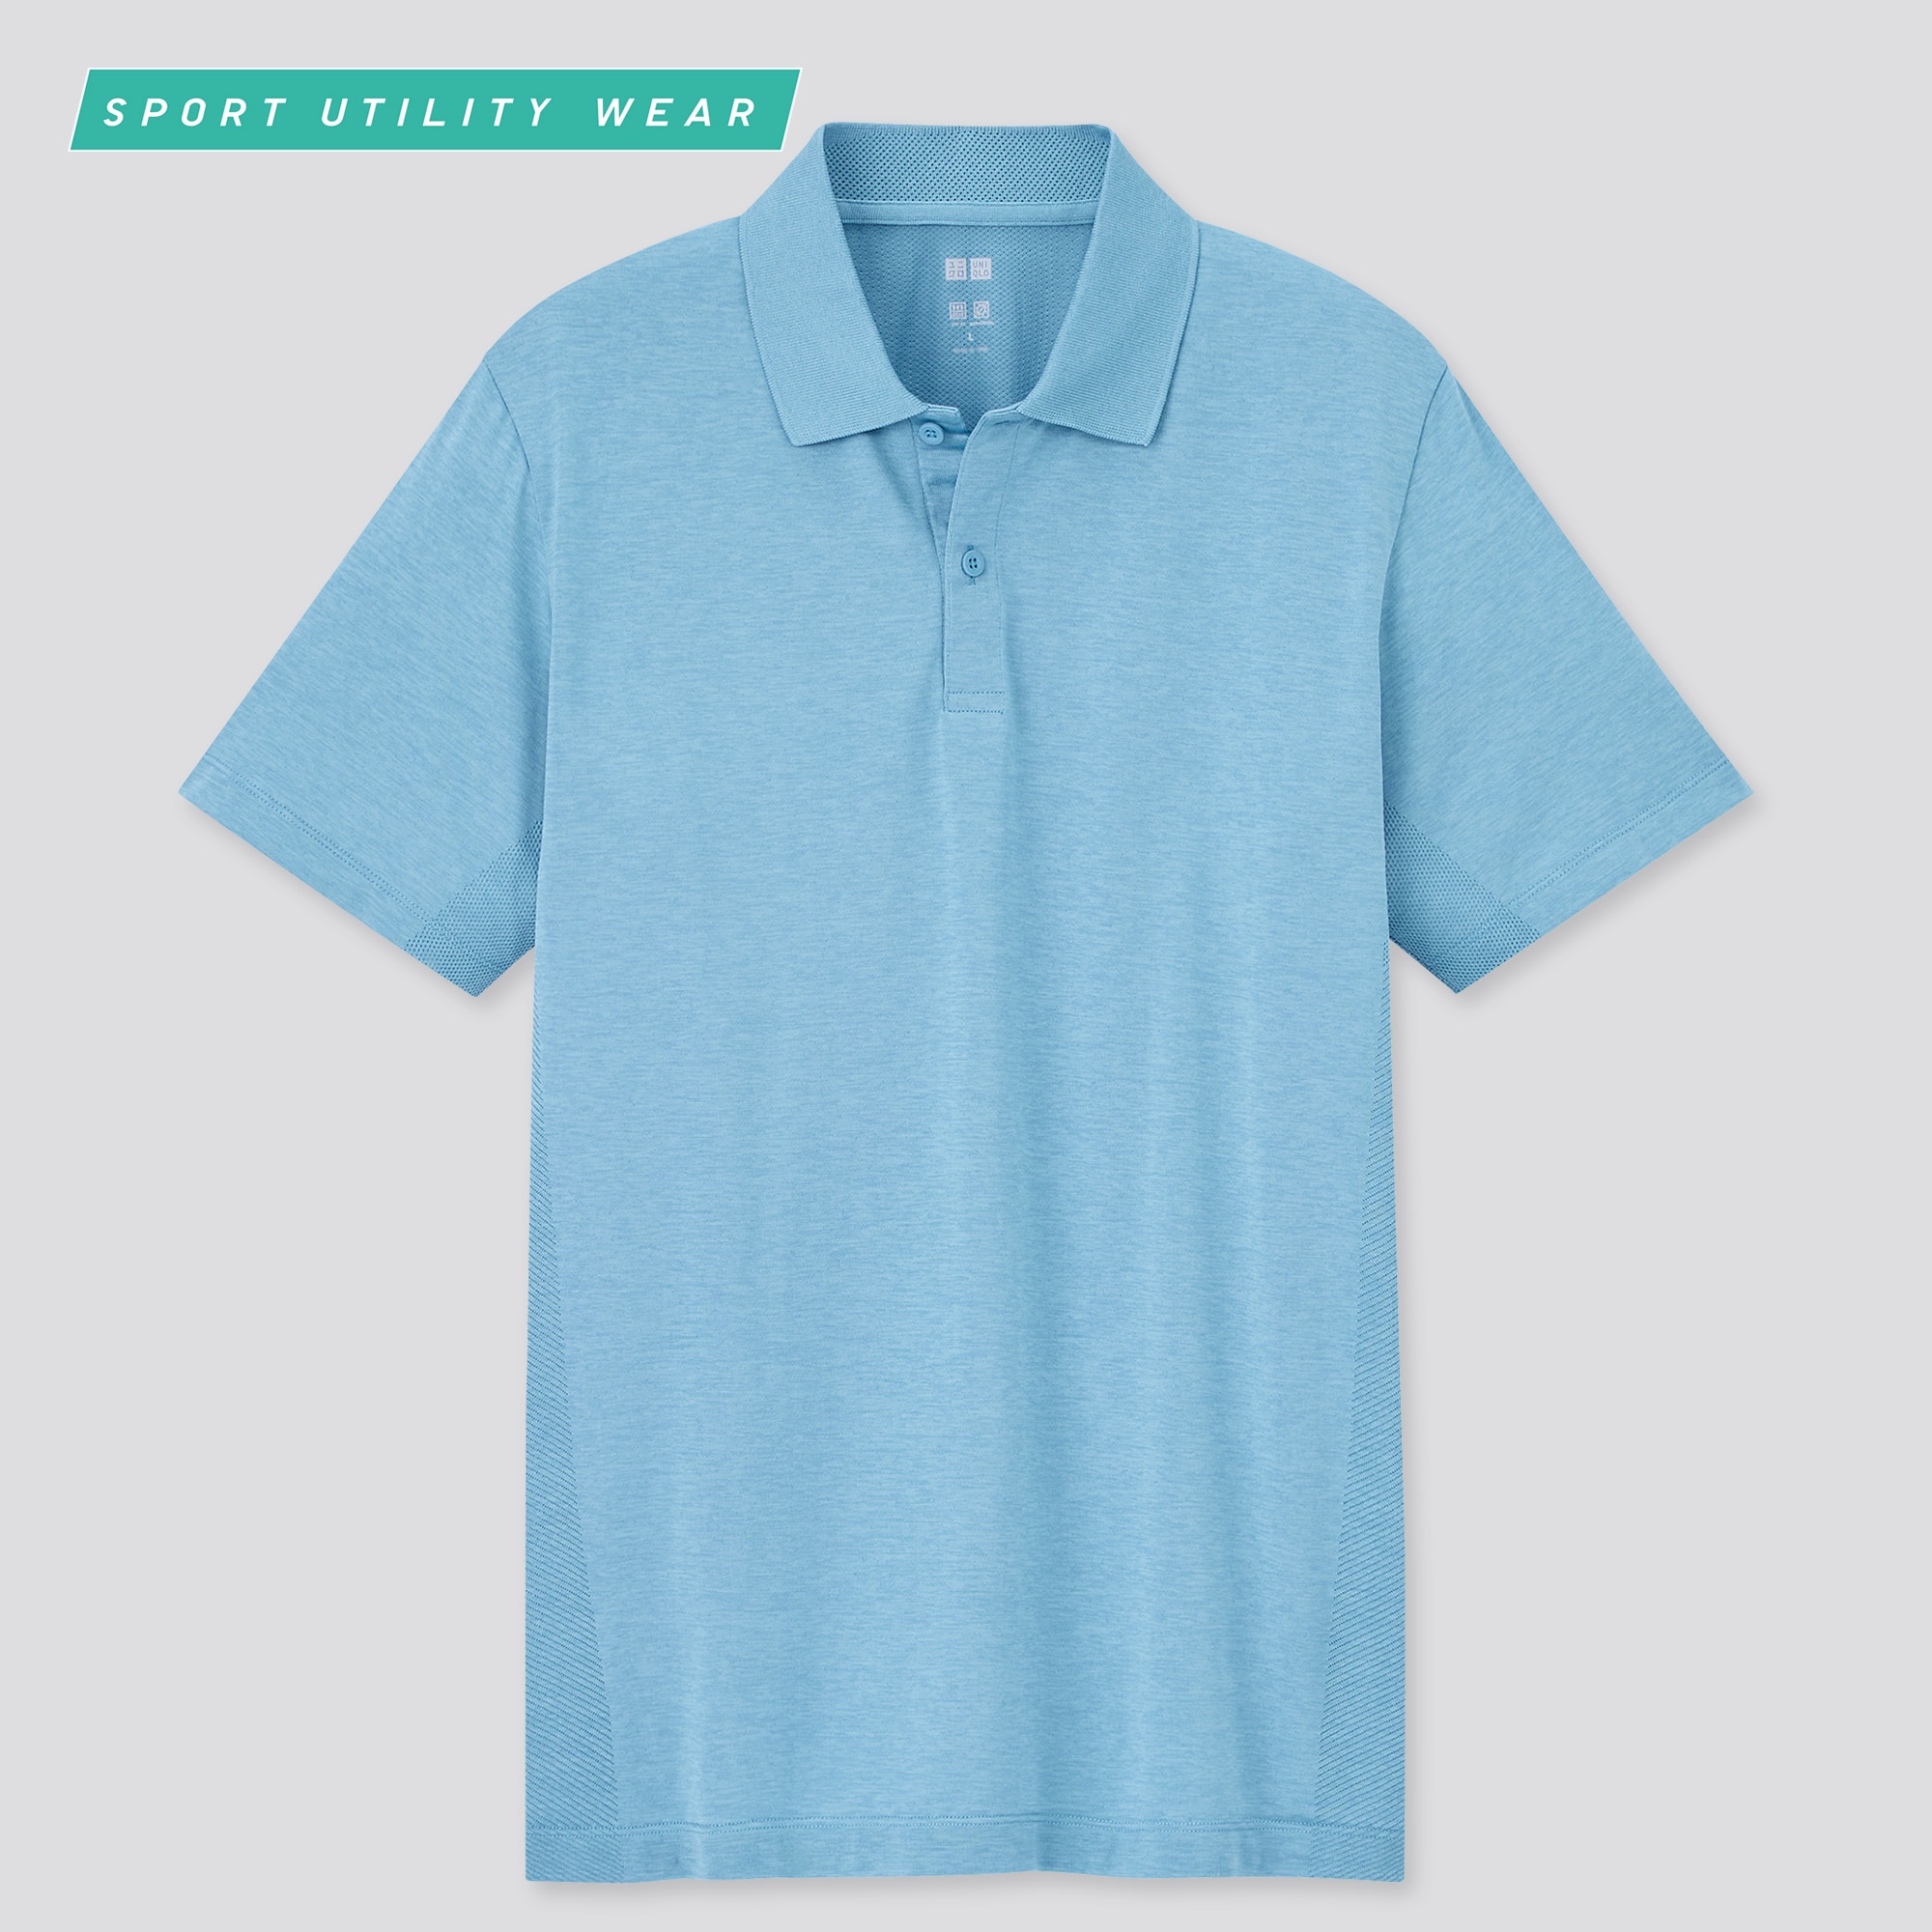 DRY-EX Short-Sleeve Polo Shirt : Color - COL03 GRAY, Size - XL (433041)